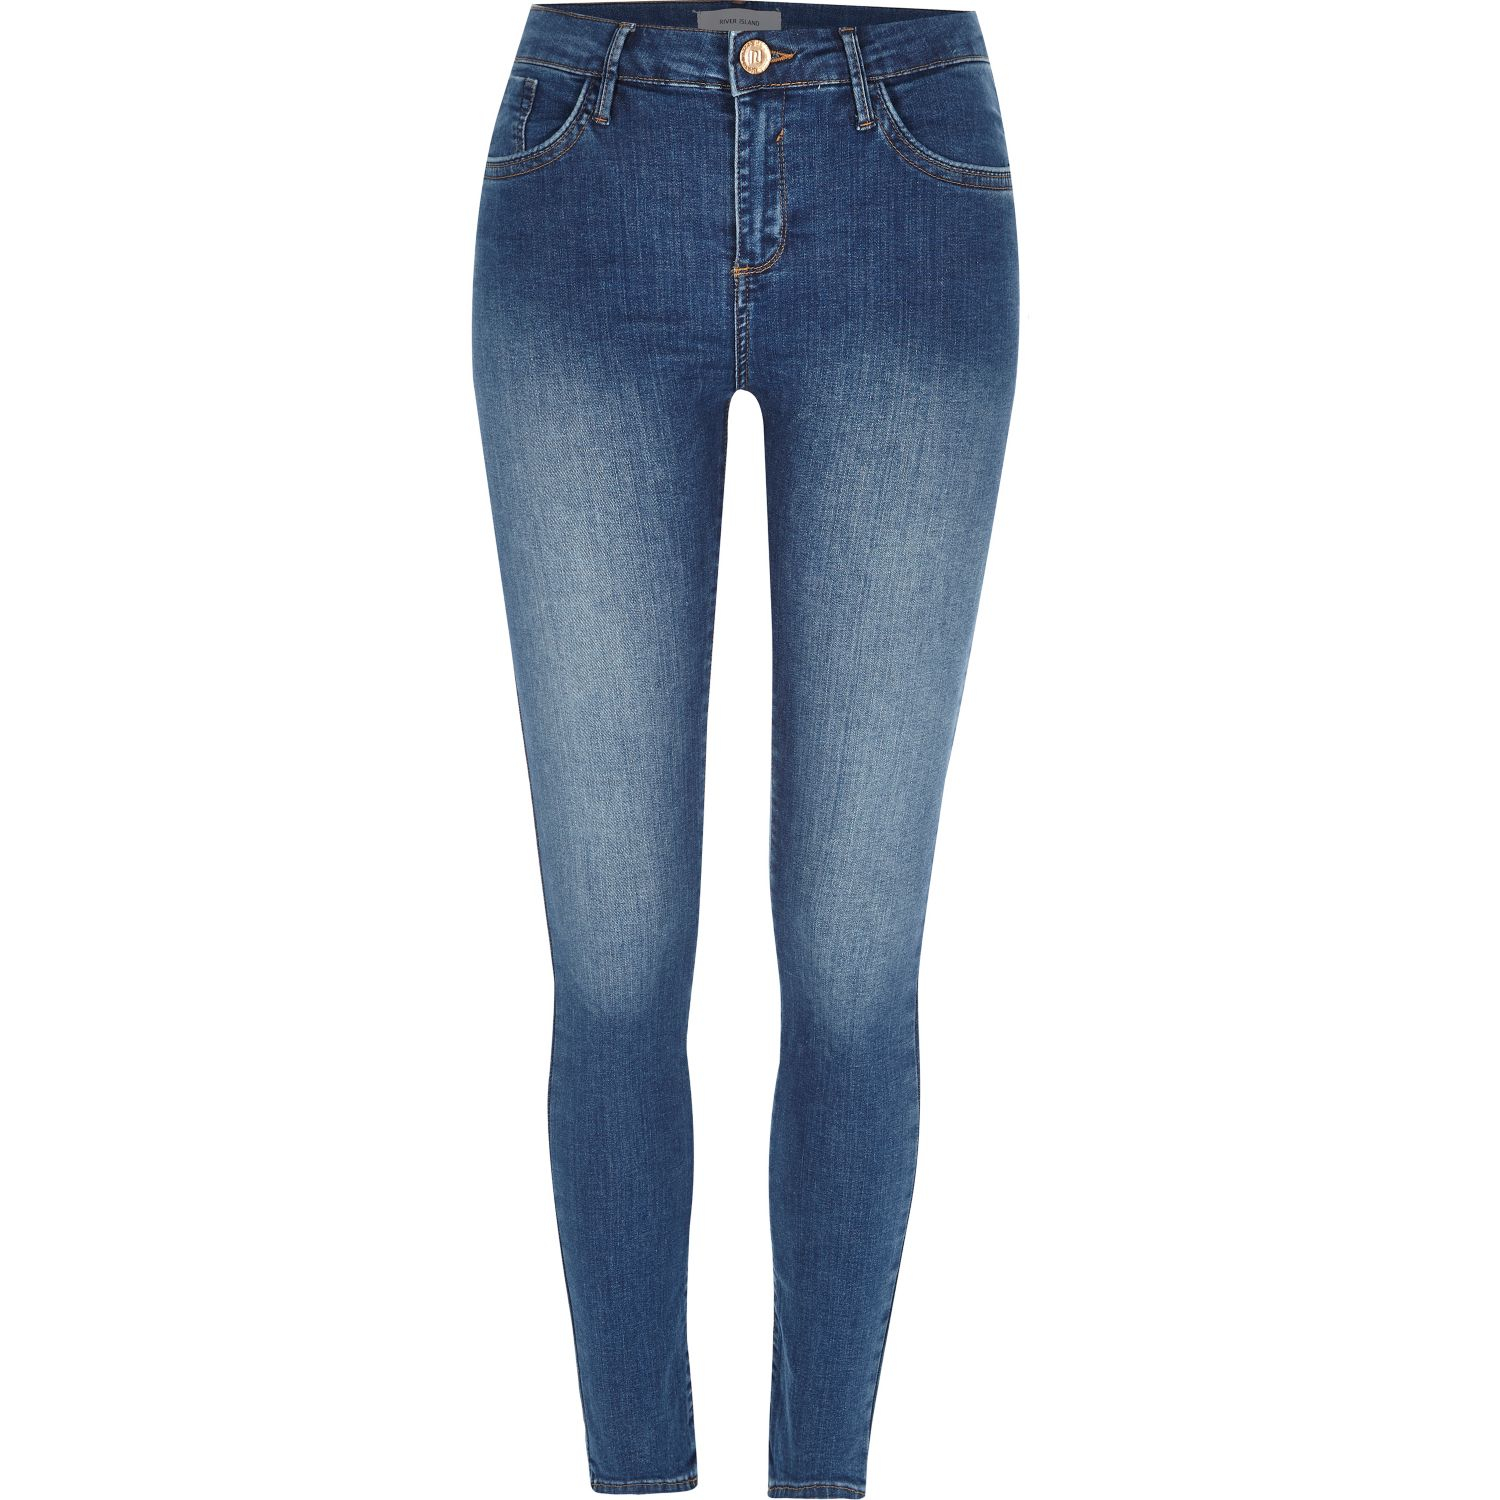 Lyst - River Island Mid Blue Wash Amelie Super Skinny Jeans in Blue